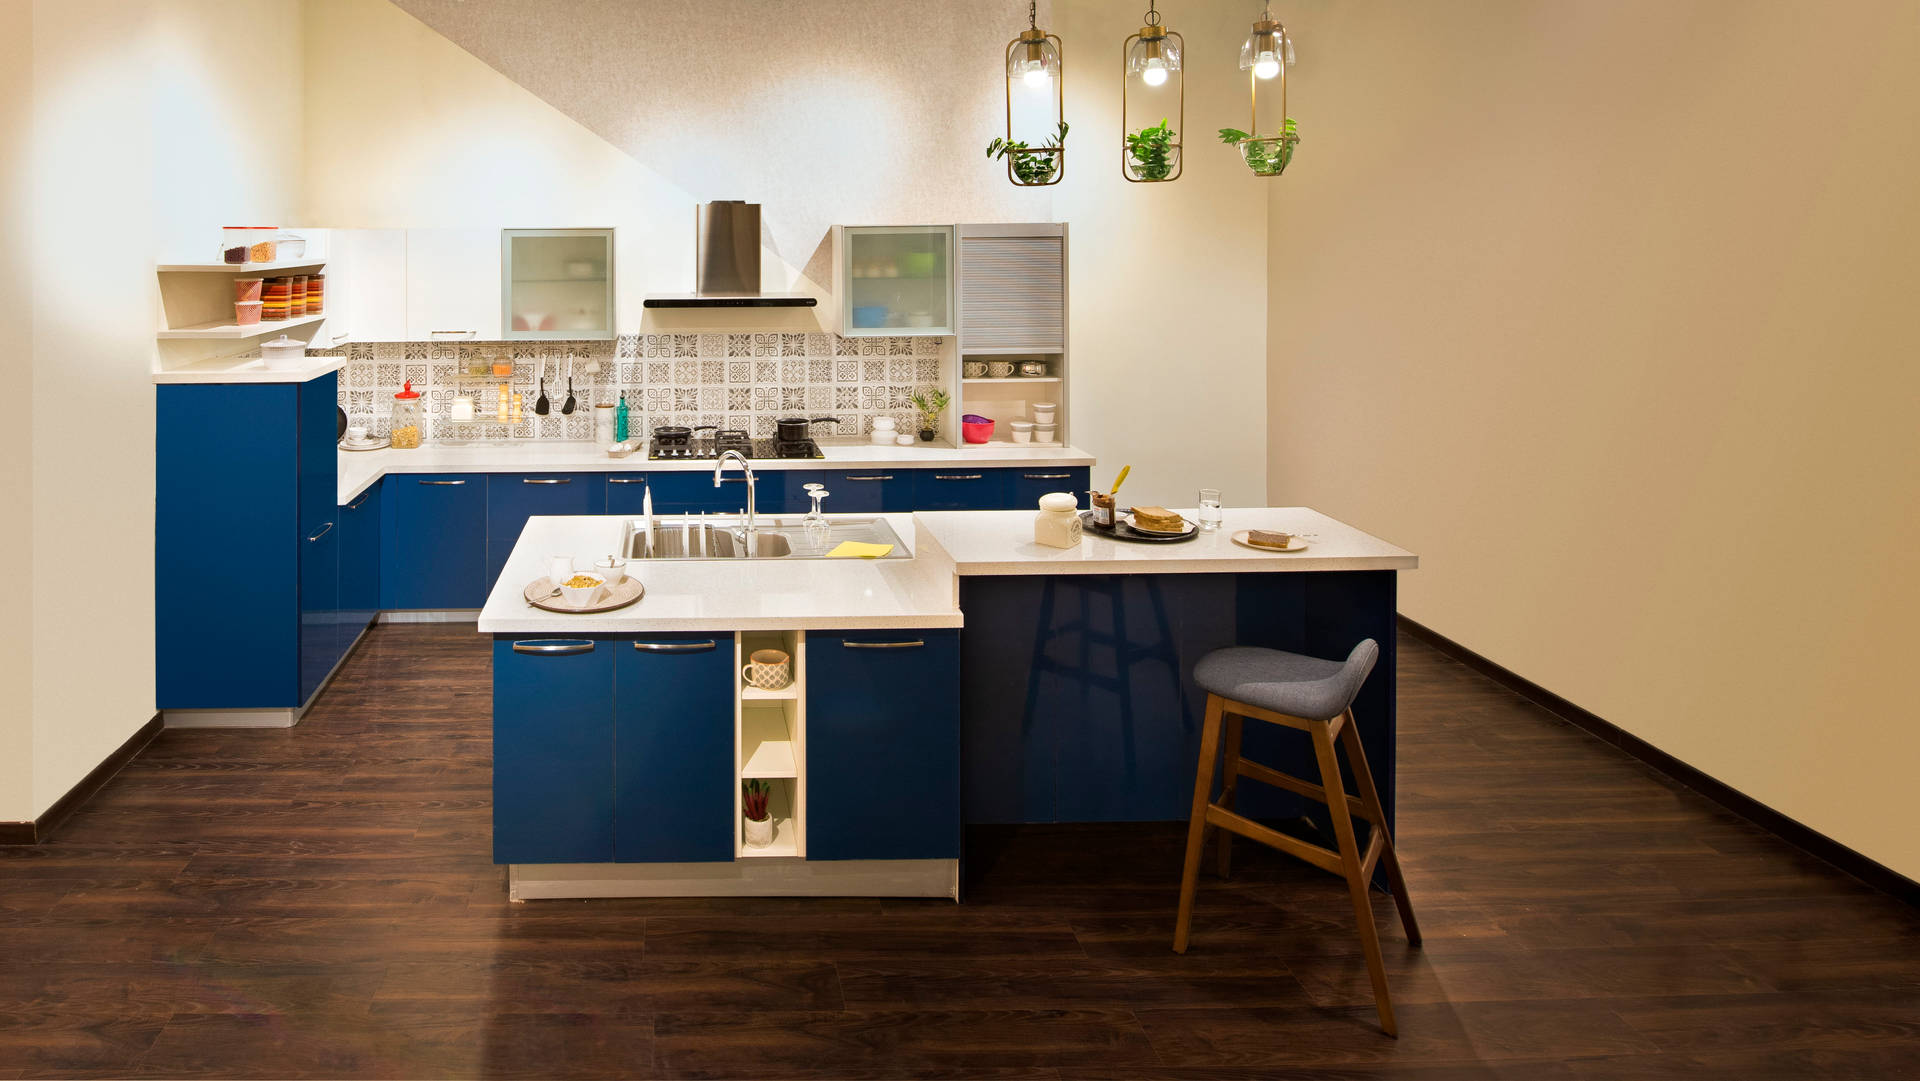 Kitchen Design With Blue Cabinets Wallpaper